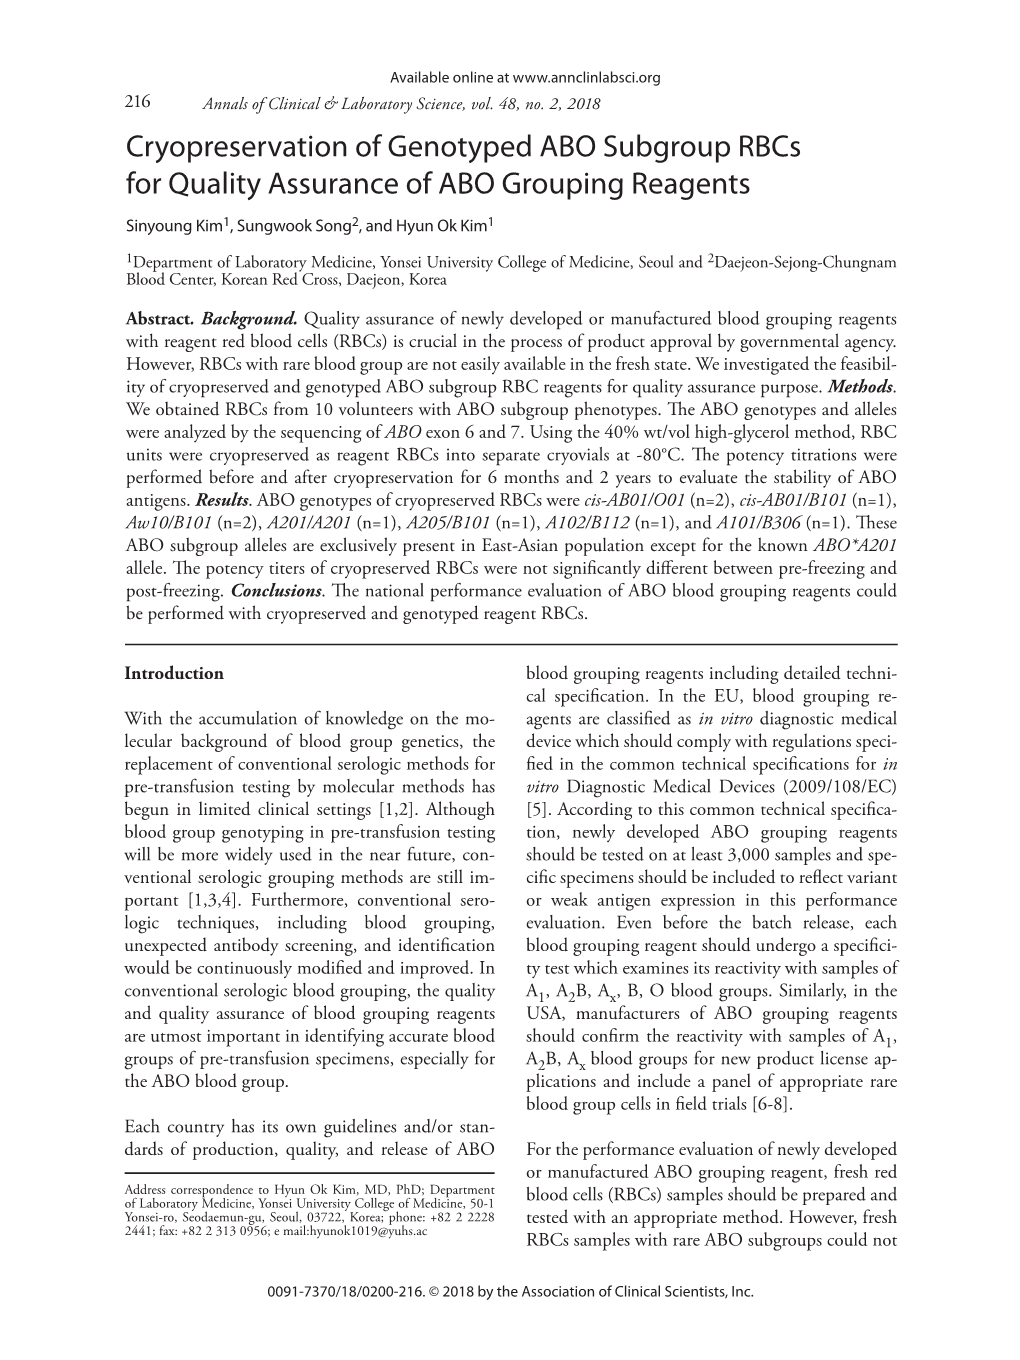 Cryopreservation of Genotyped ABO Subgroup Rbcs for Quality Assurance of ABO Grouping Reagents